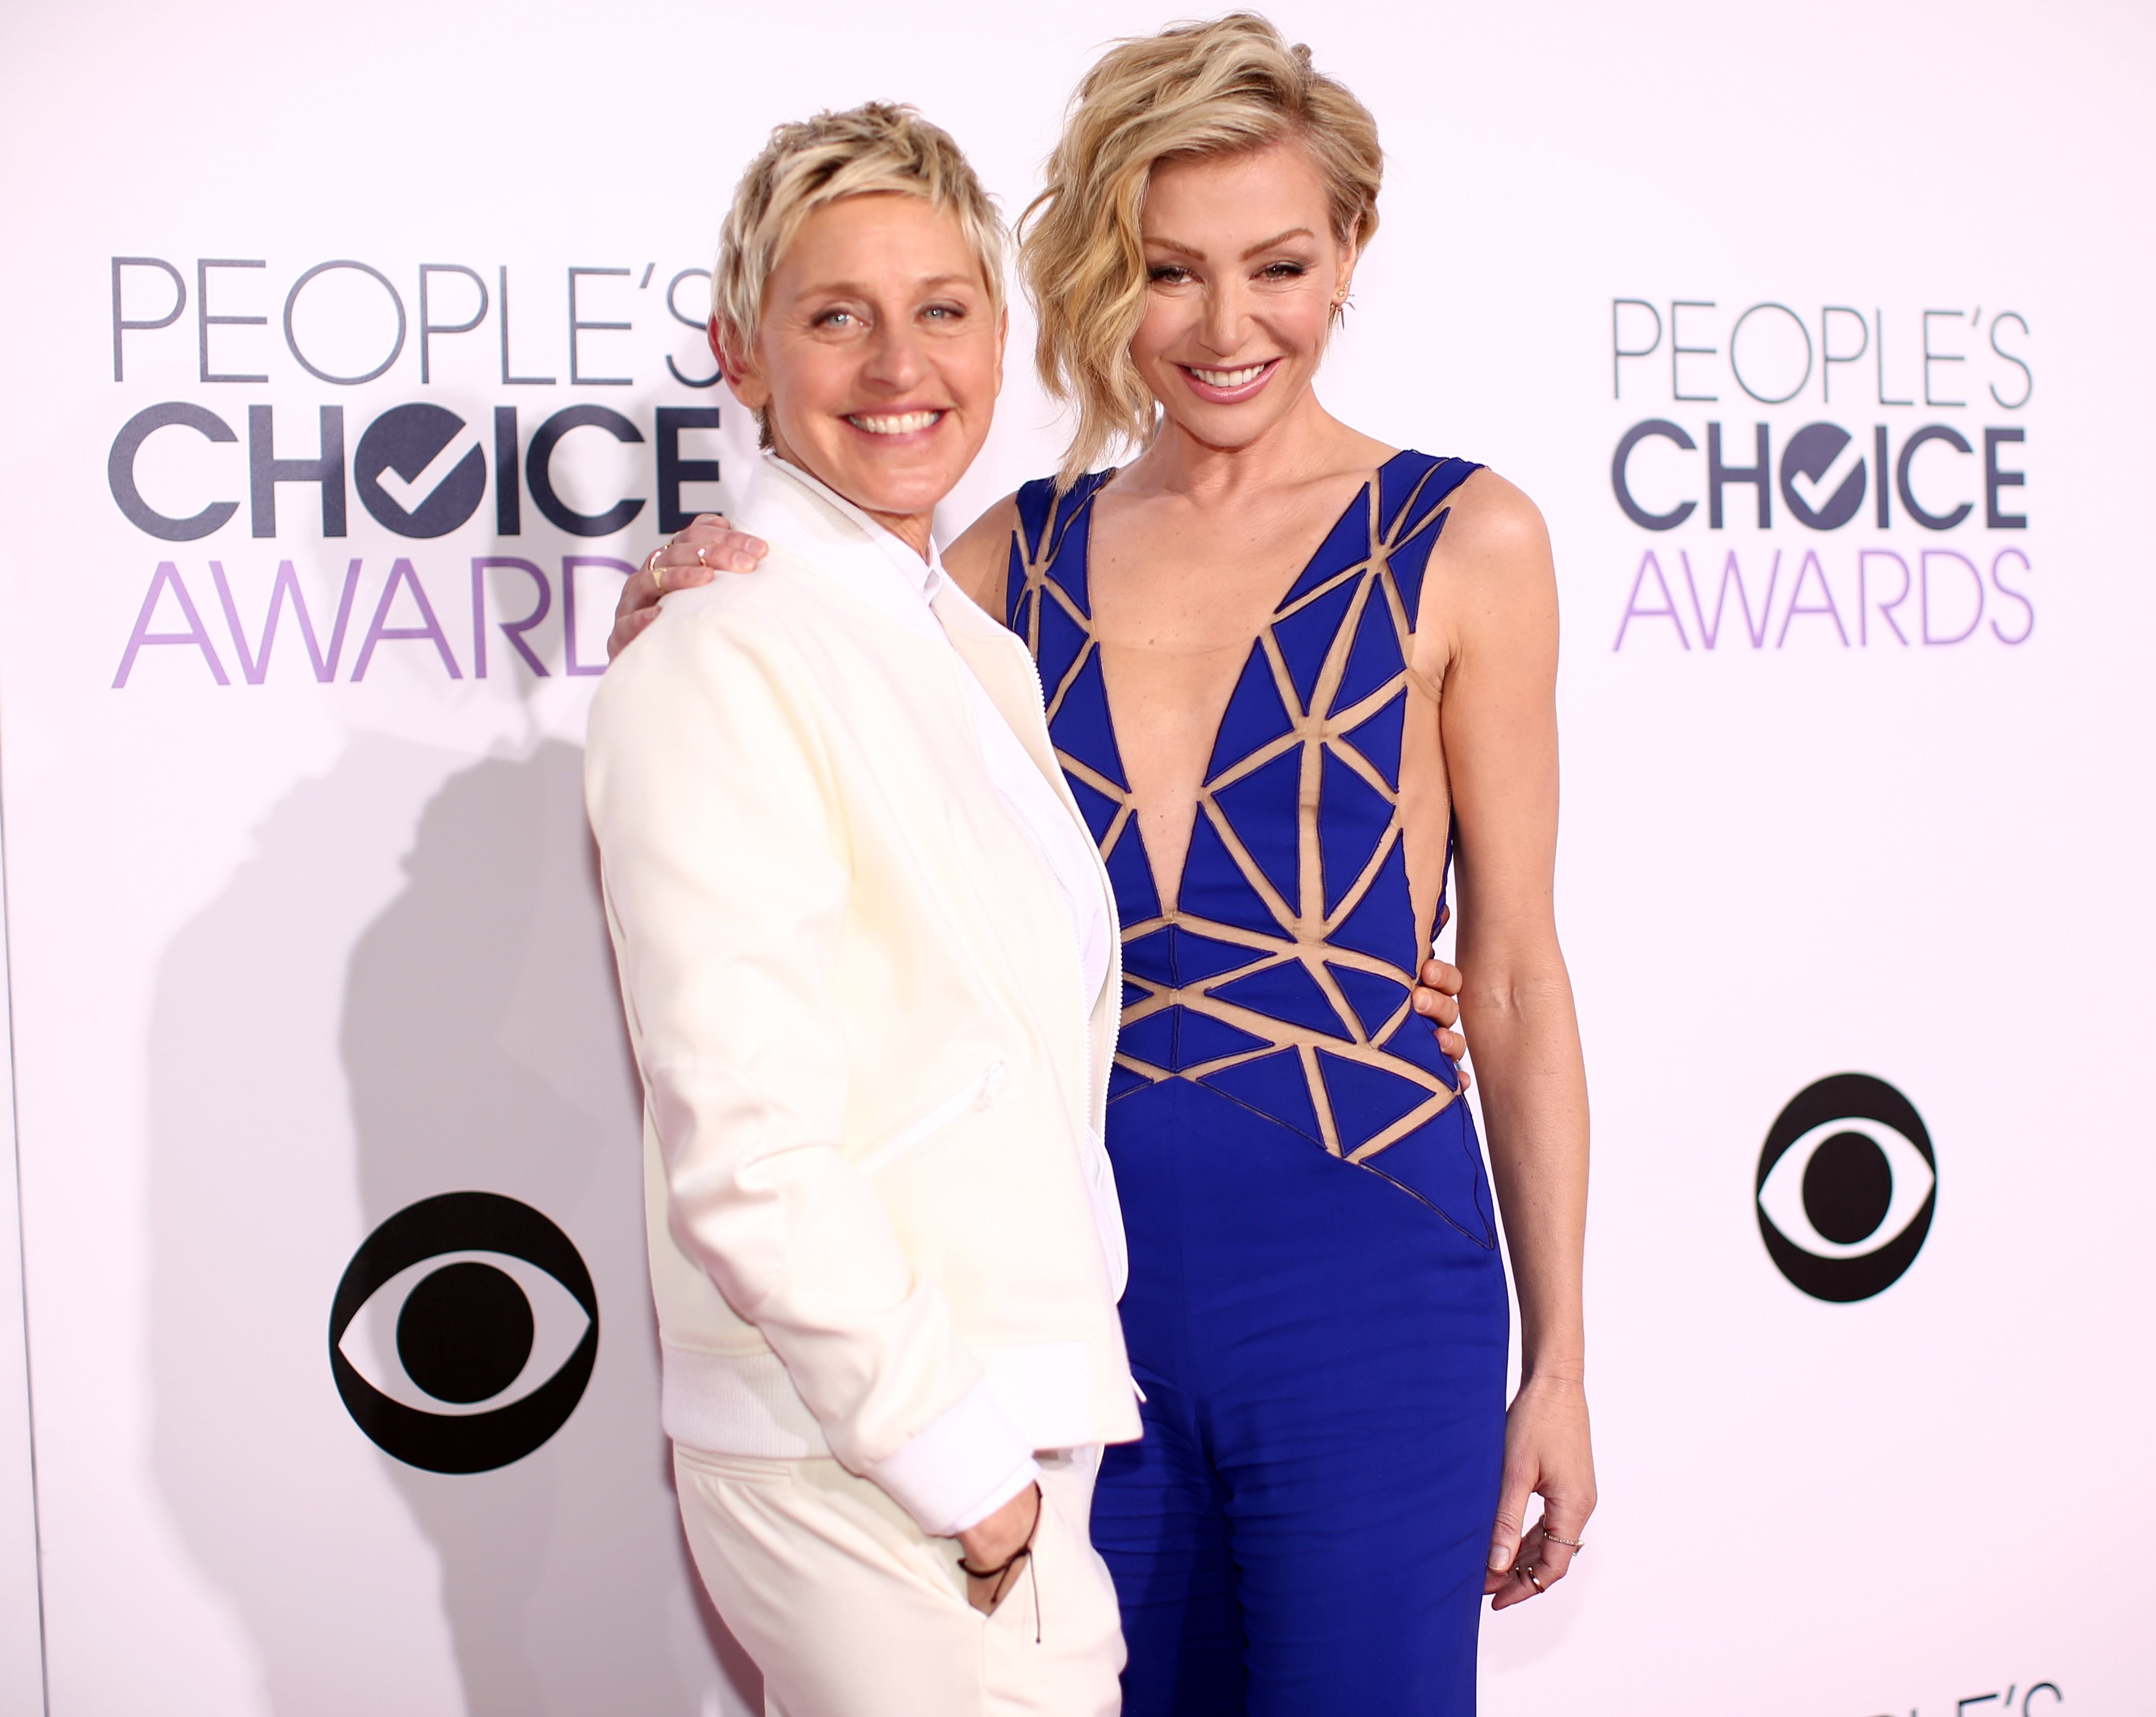 Ellen DeGeneres and actress Portia de Rossi at The 41st Annual People's Choice Awards at Nokia Theatre LA Live on January 7, 2015. | Photo: Getty Images